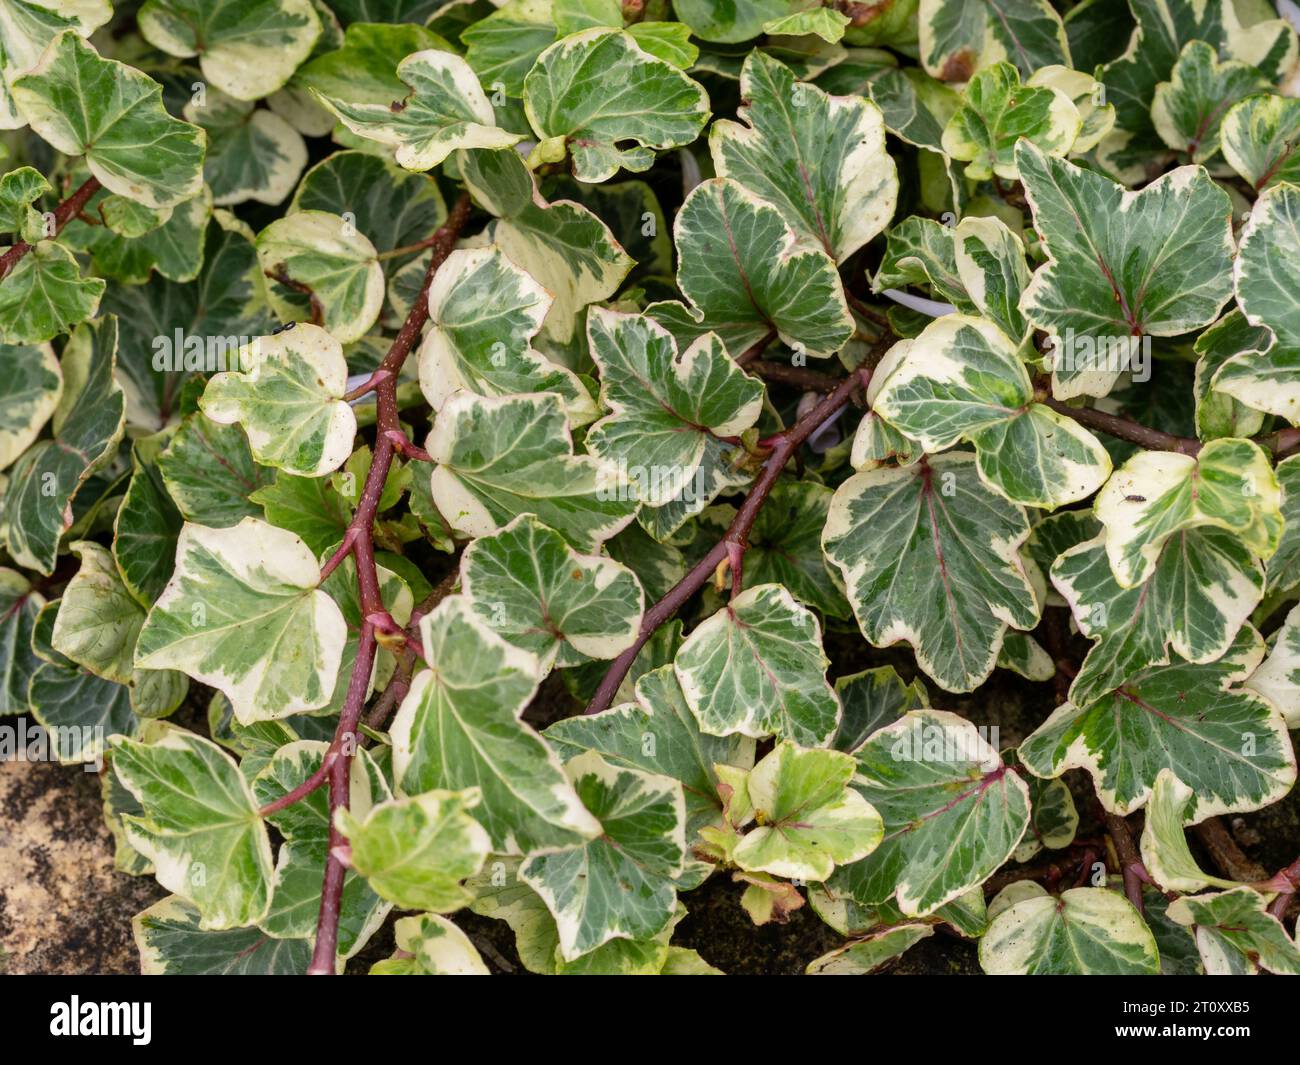 Variegated green leaves of ivy, variety Seabreeze Stock Photo